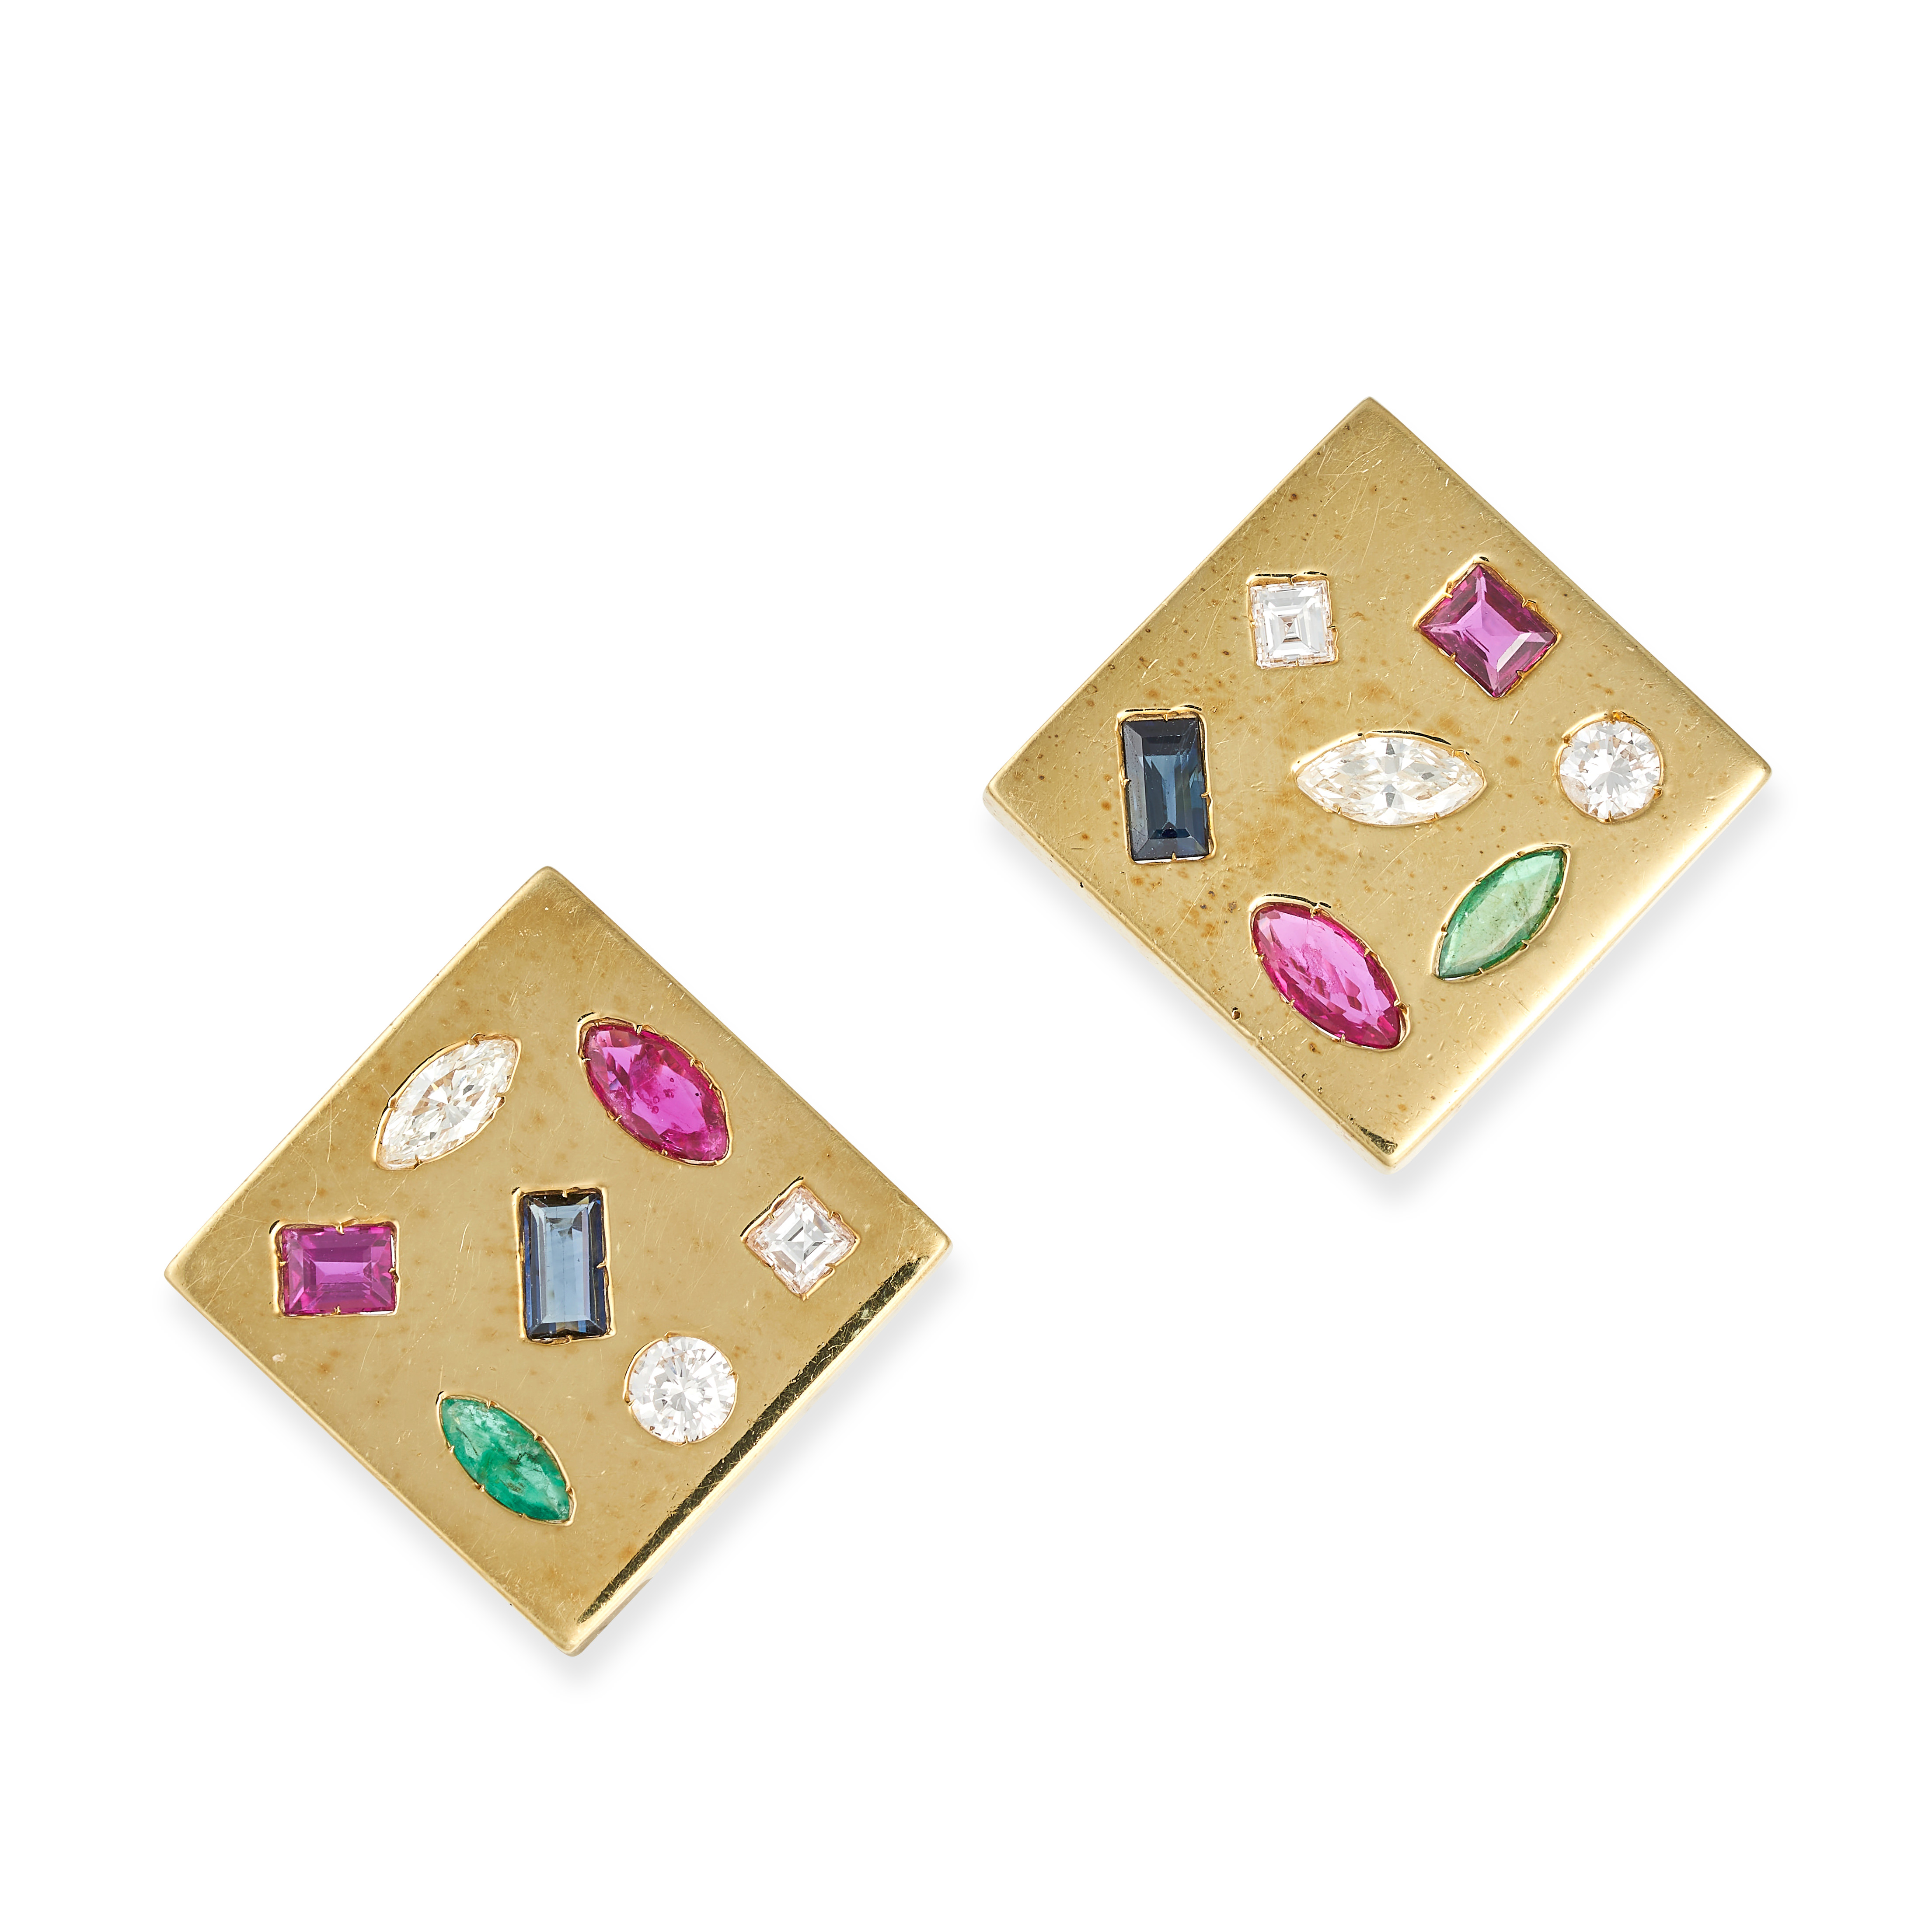 A PAIR OF GEMSET EARRINGS in 18ct yellow gold, each square shaped earring set with a round brilli...